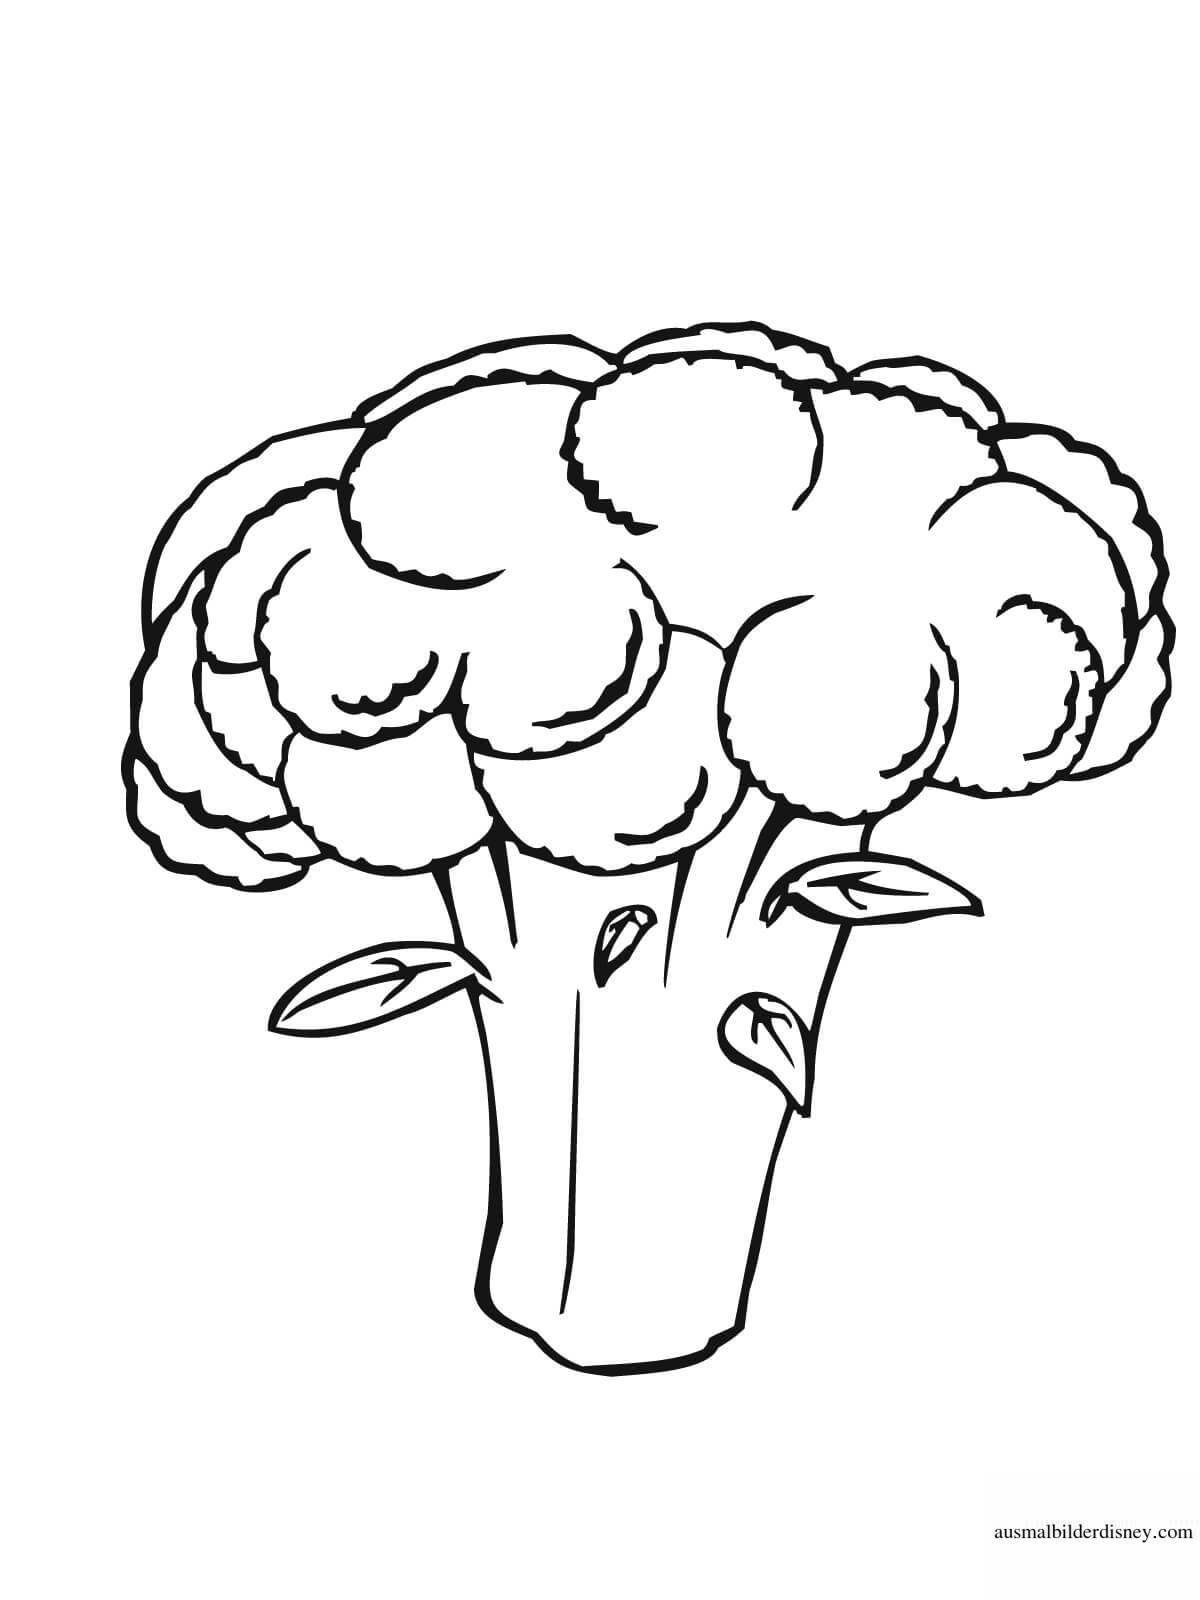 Colorful broccoli coloring page for kids